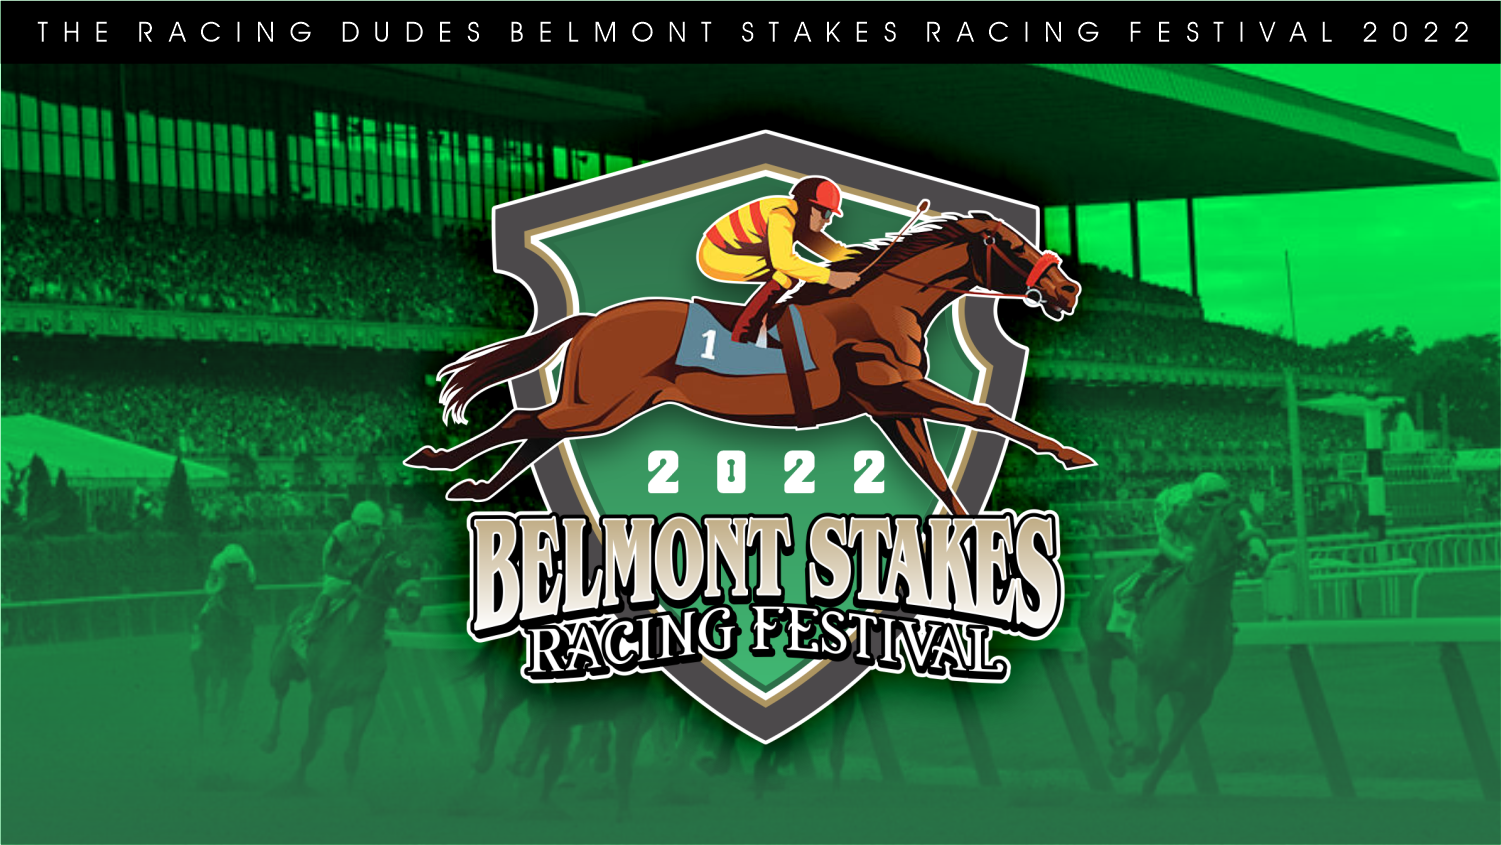 2022 Belmont Stakes Picks and Wagering Guide Racing Dudes